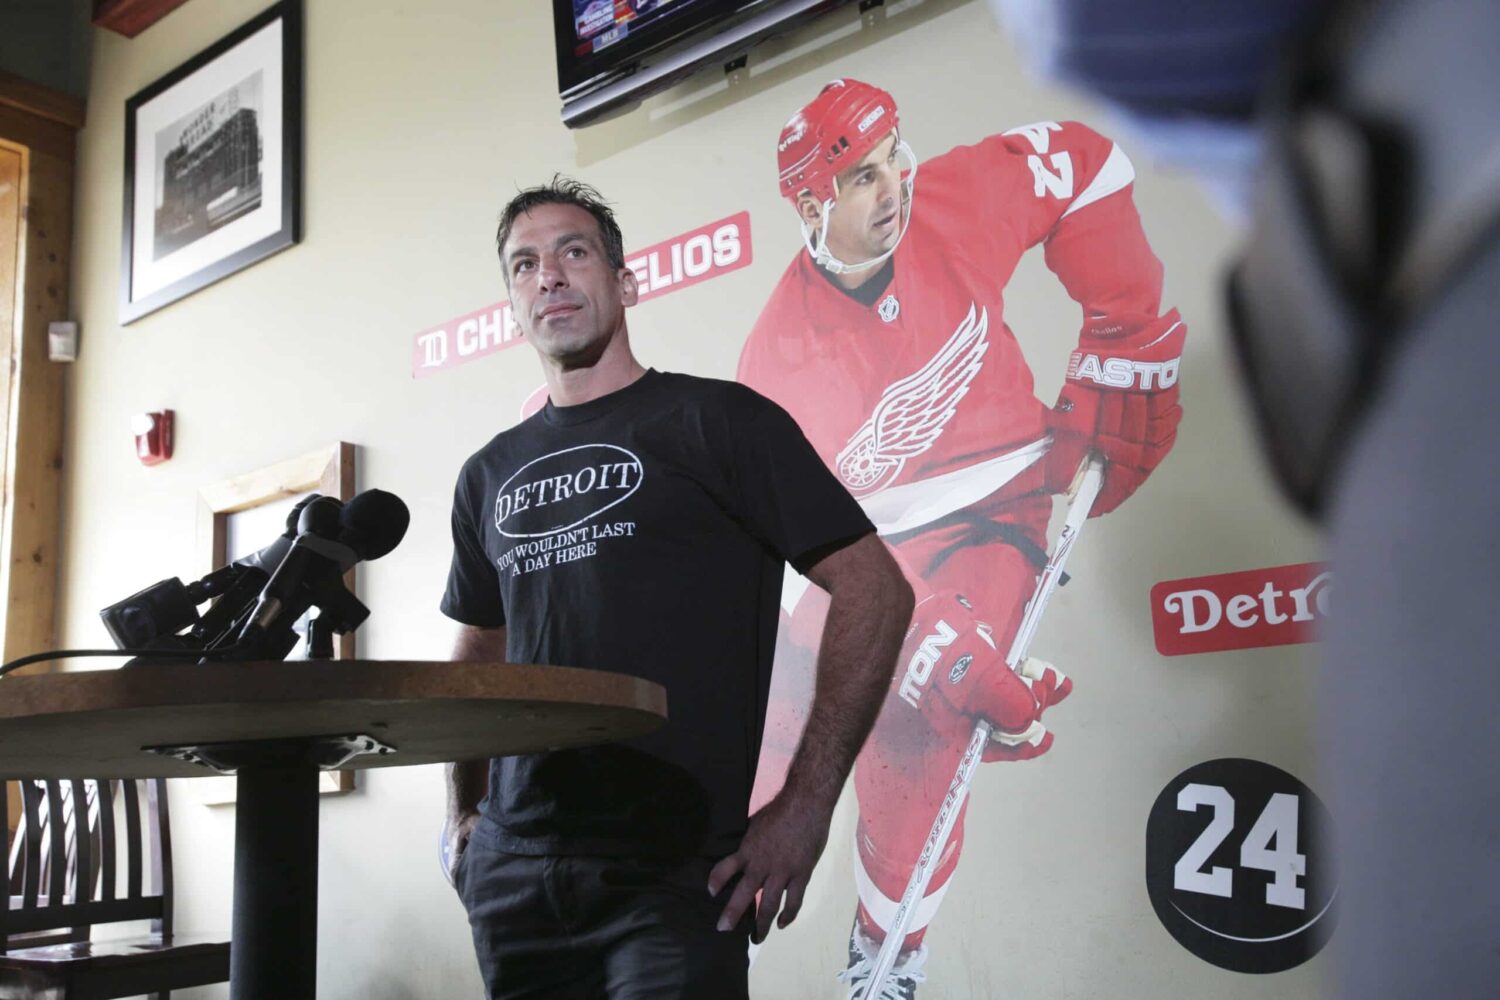 ESPN Hockey Analyst Chris Chelios Fired, Why is He Not Returning